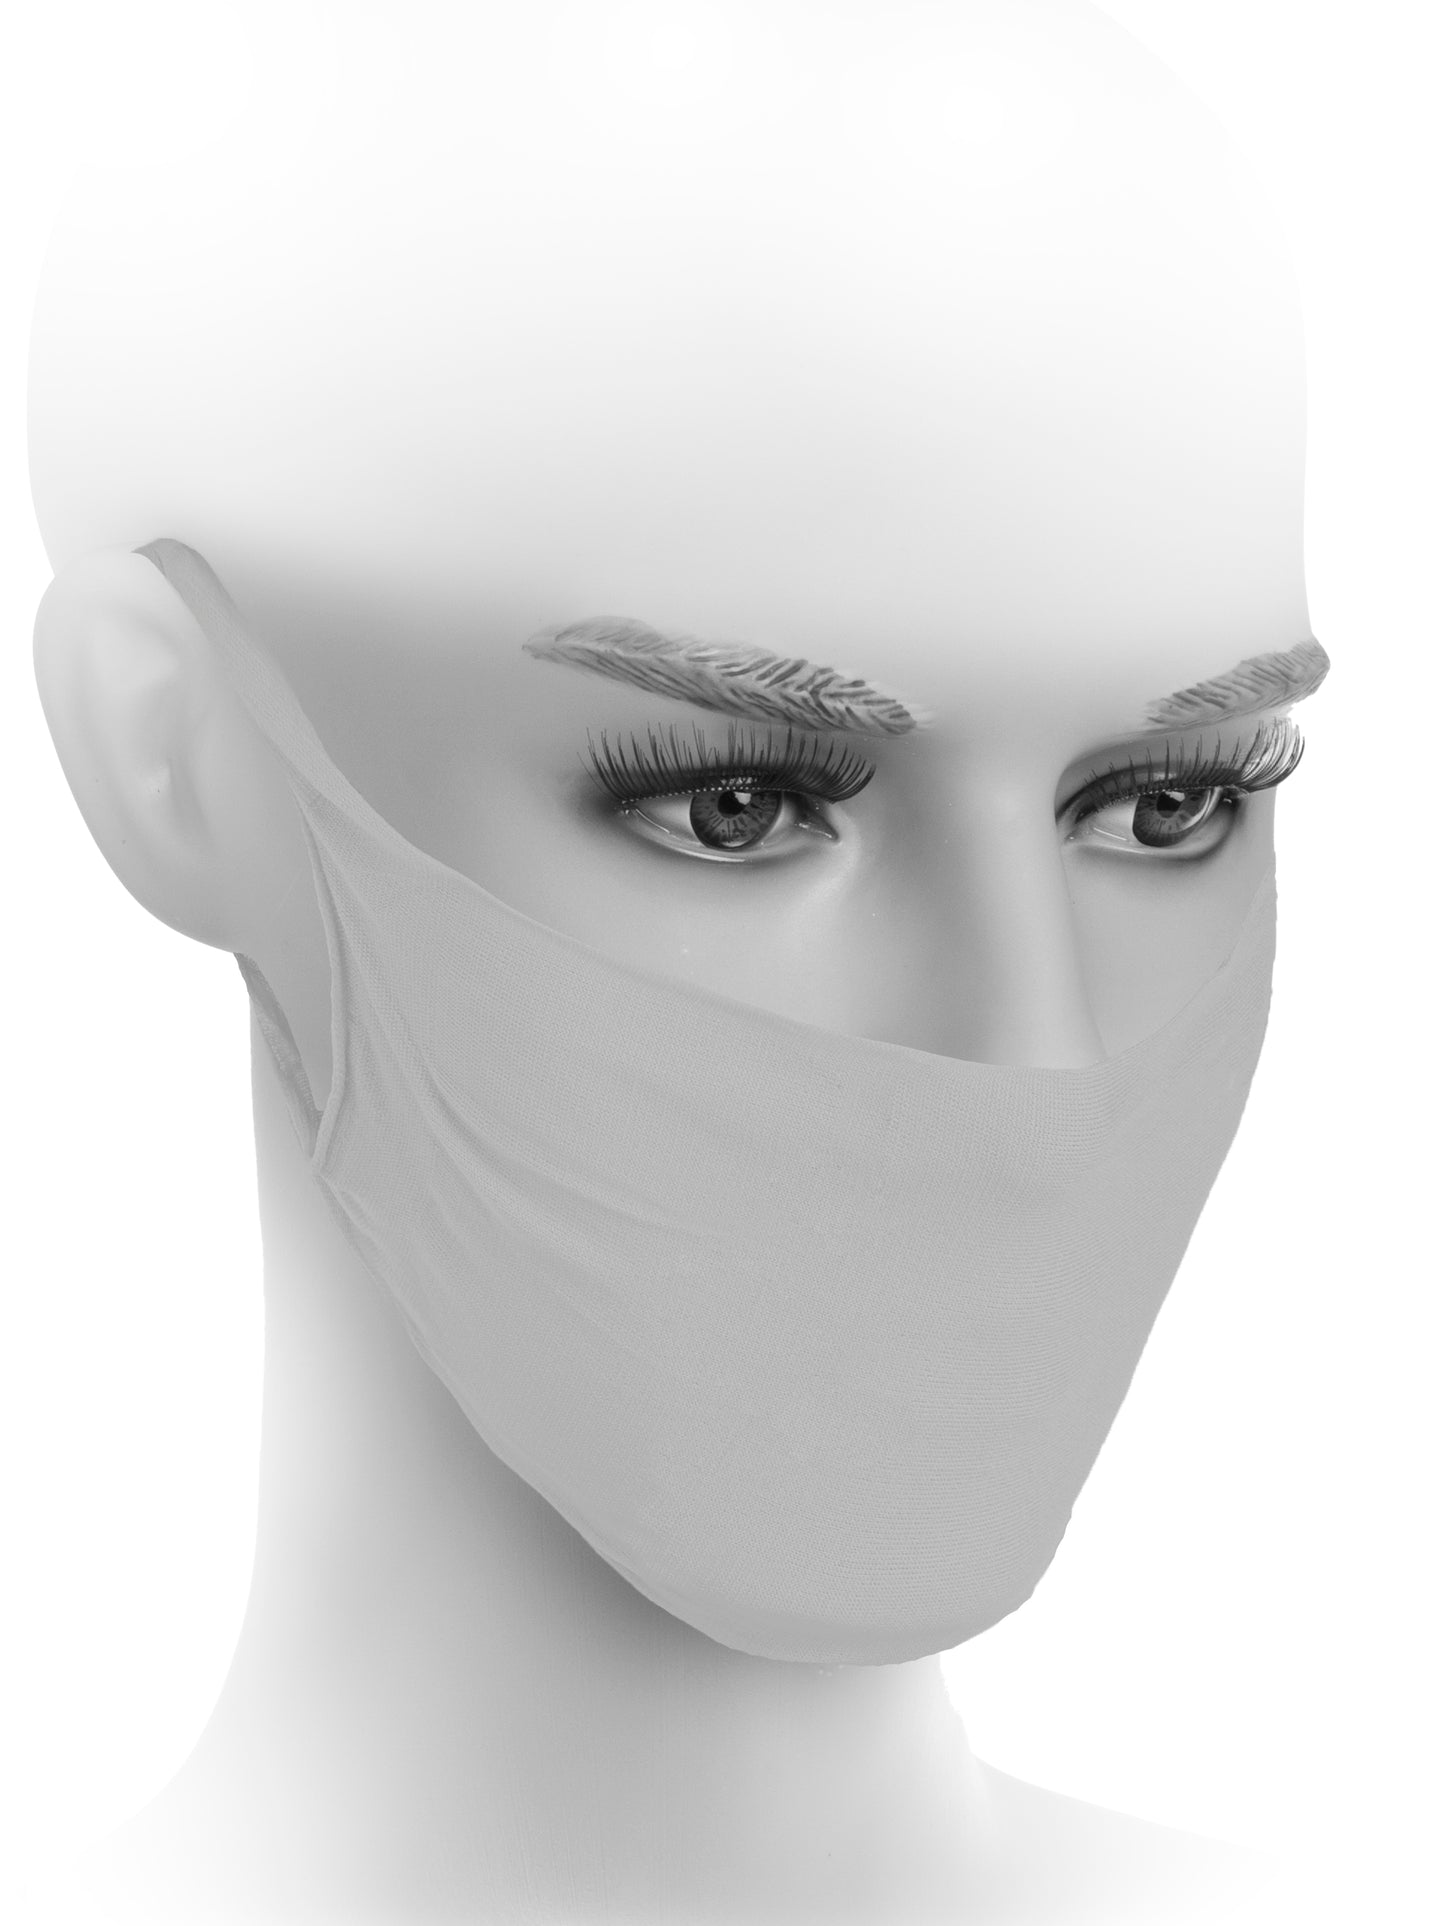 Fiore Hygiene Face Mask M0001 - face covering in light grey